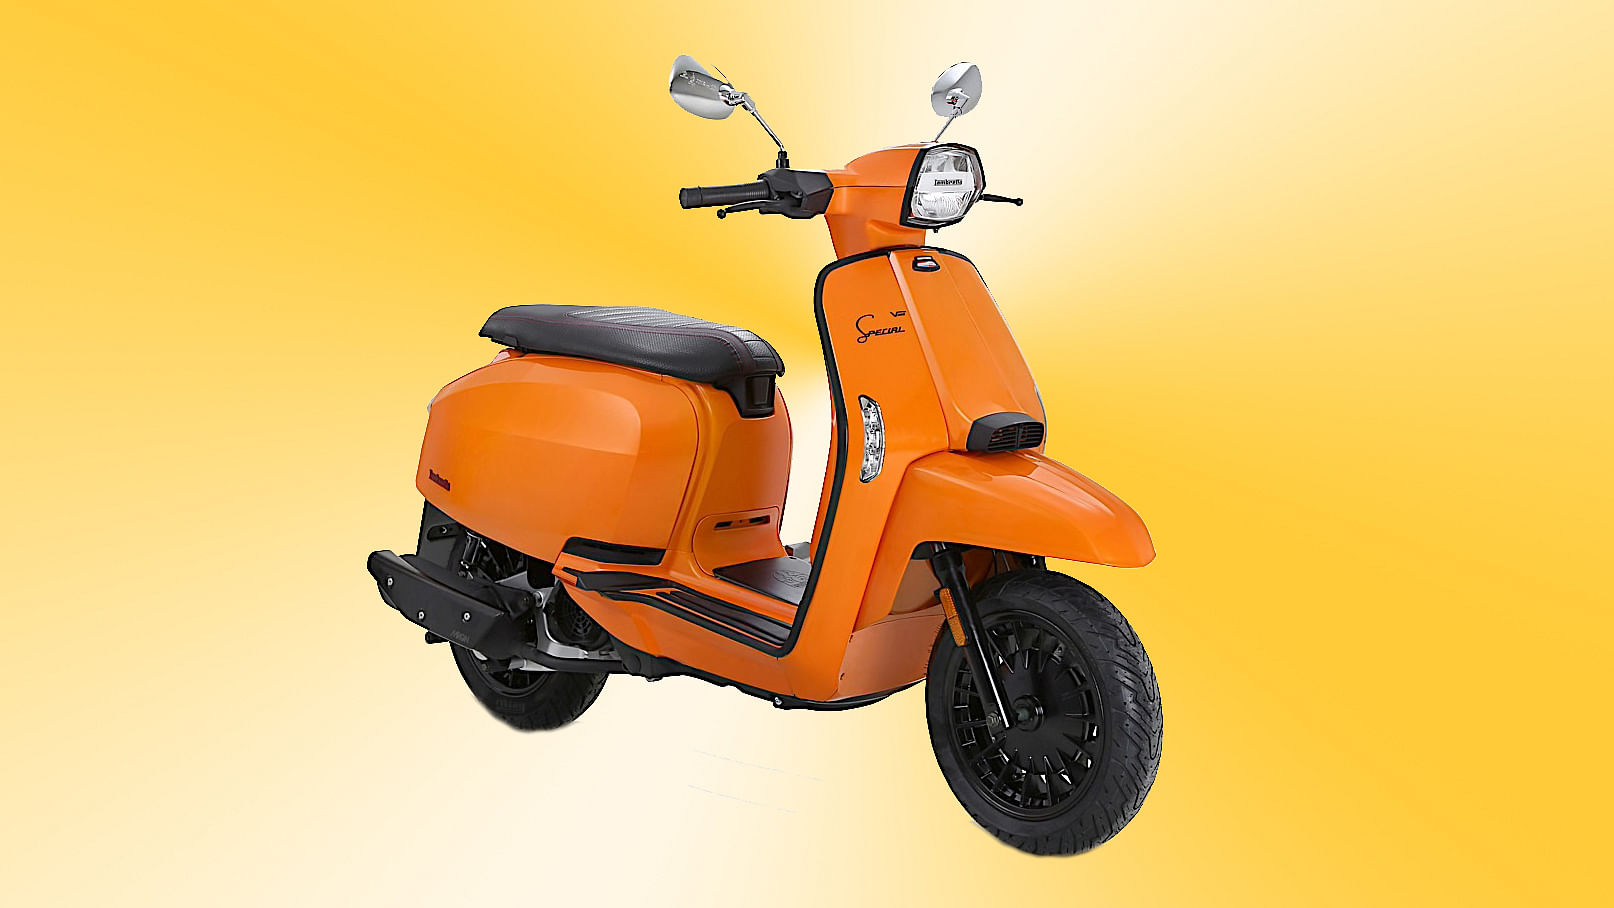 The Lambretta scooter is set to make a comeback in an electric format.